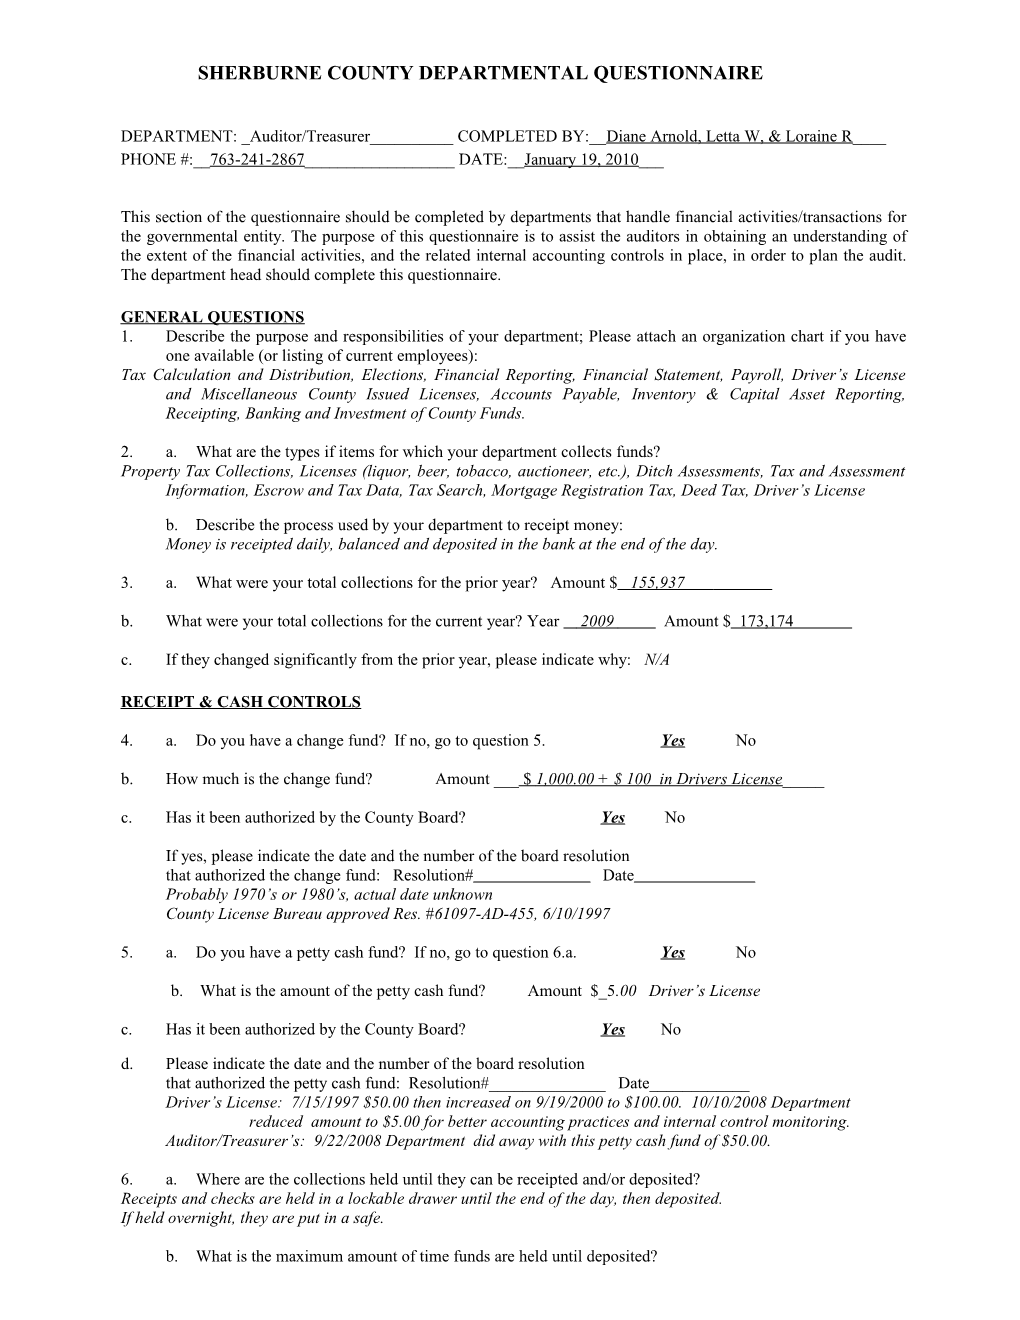 Sherburne County Departmental Questionnaire s1